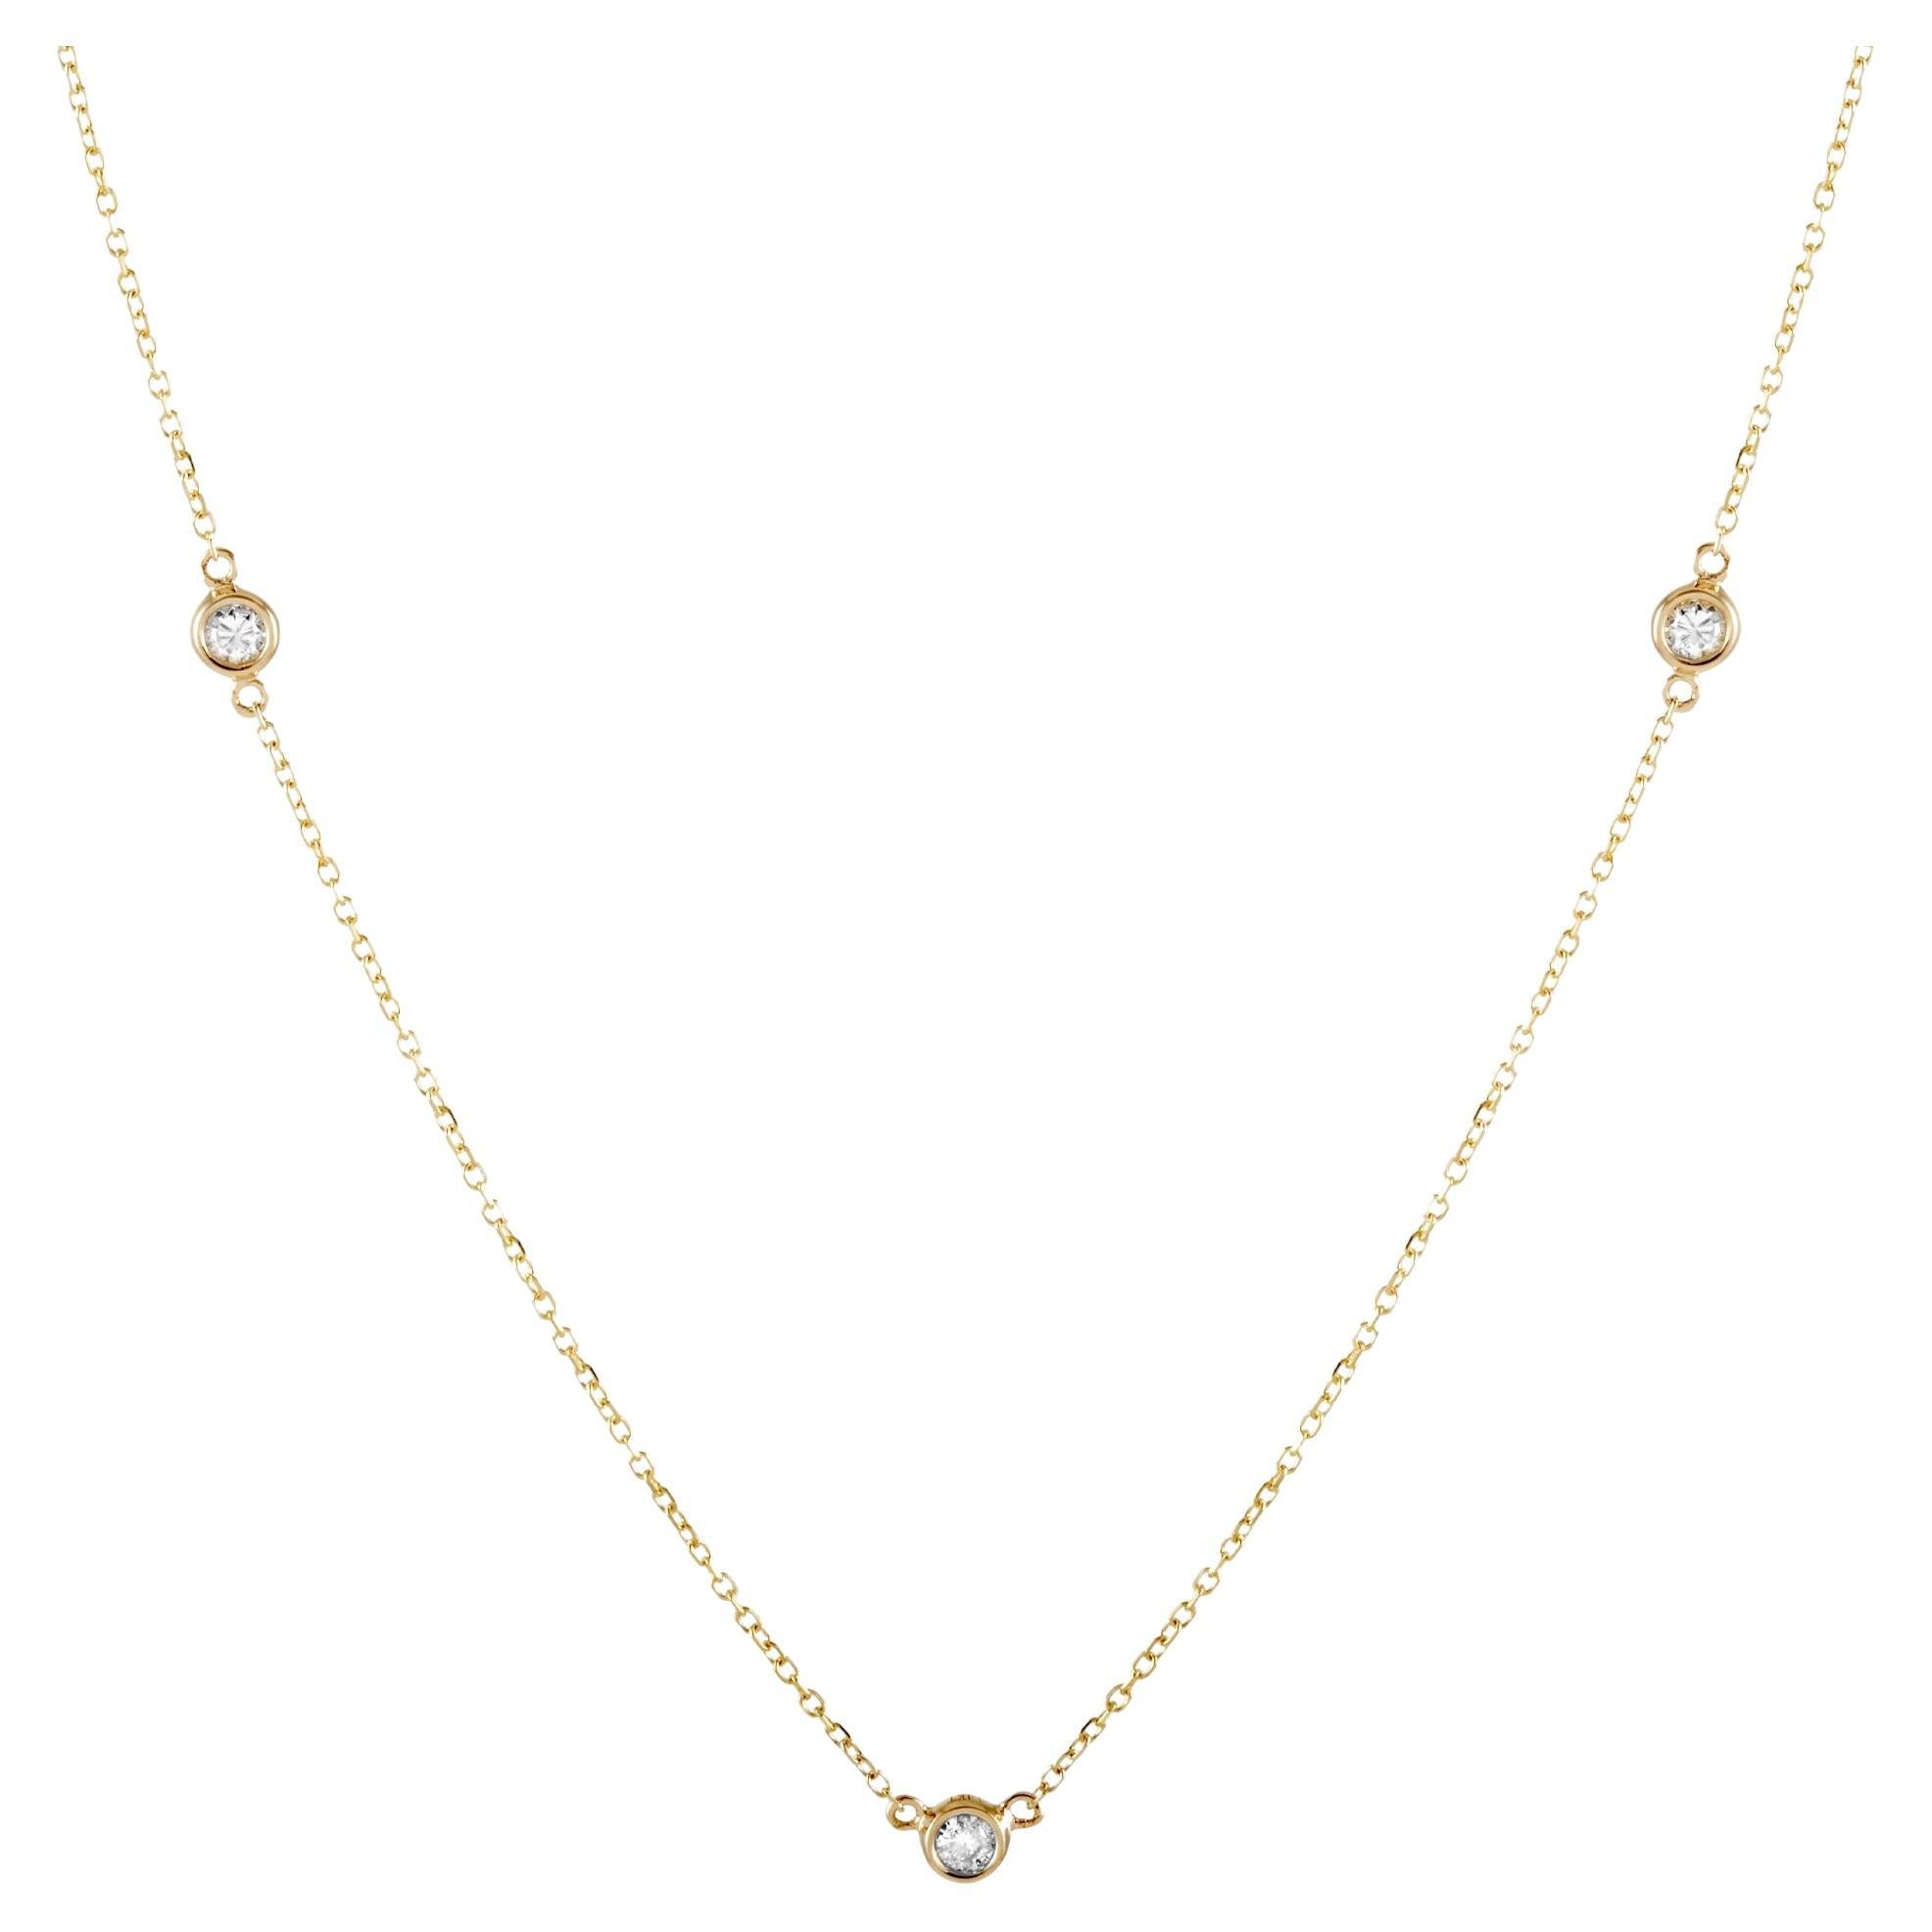 LB Exclusive 14K Yellow Gold 0.15 ct Diamond Necklace